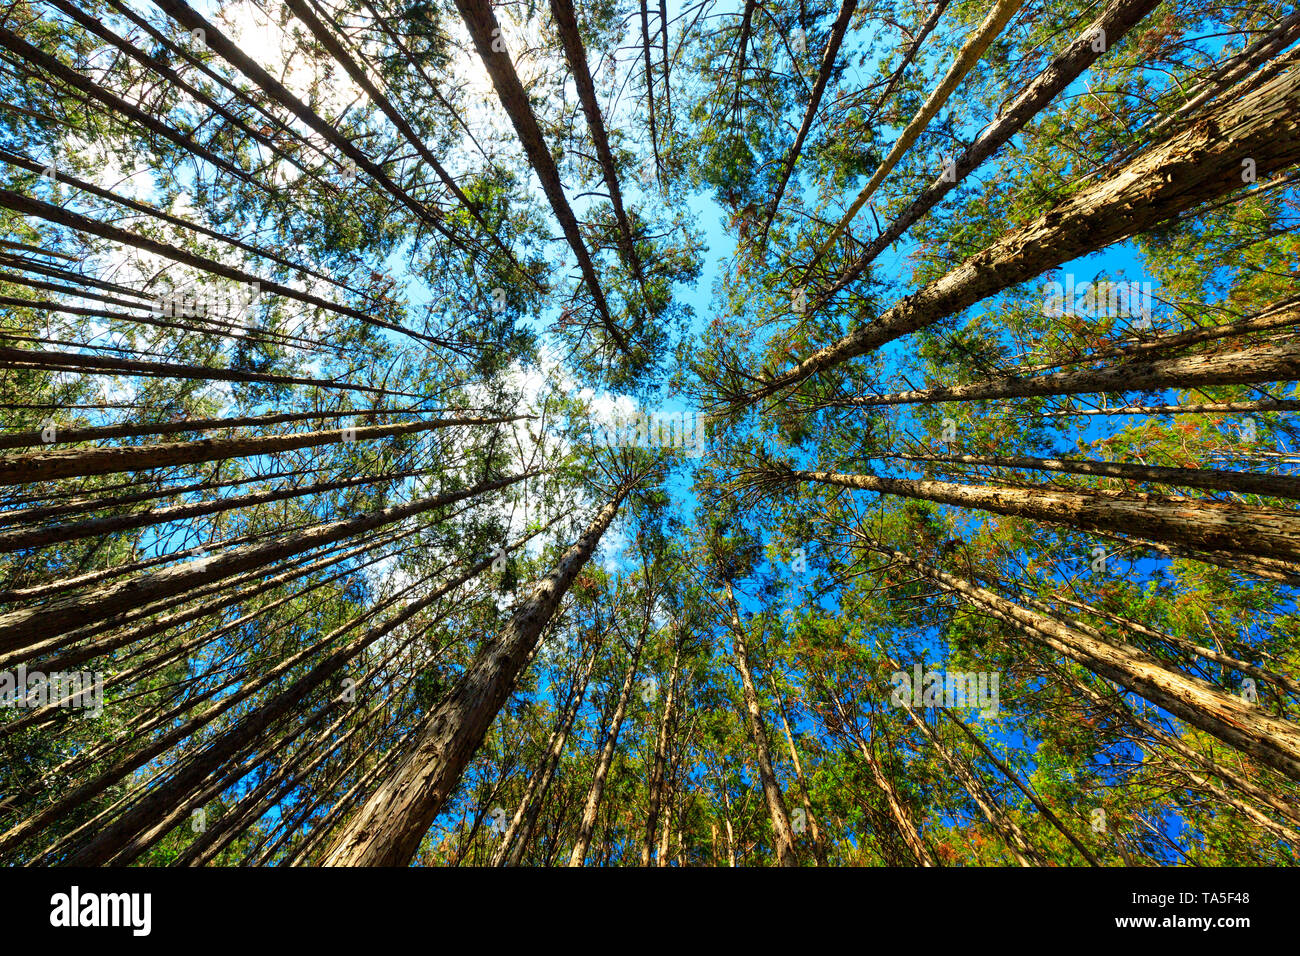 Japanese cypress forest Cryptomera Japonica dynamic view from below, Kumano Kodo forest in Japan Stock Photo